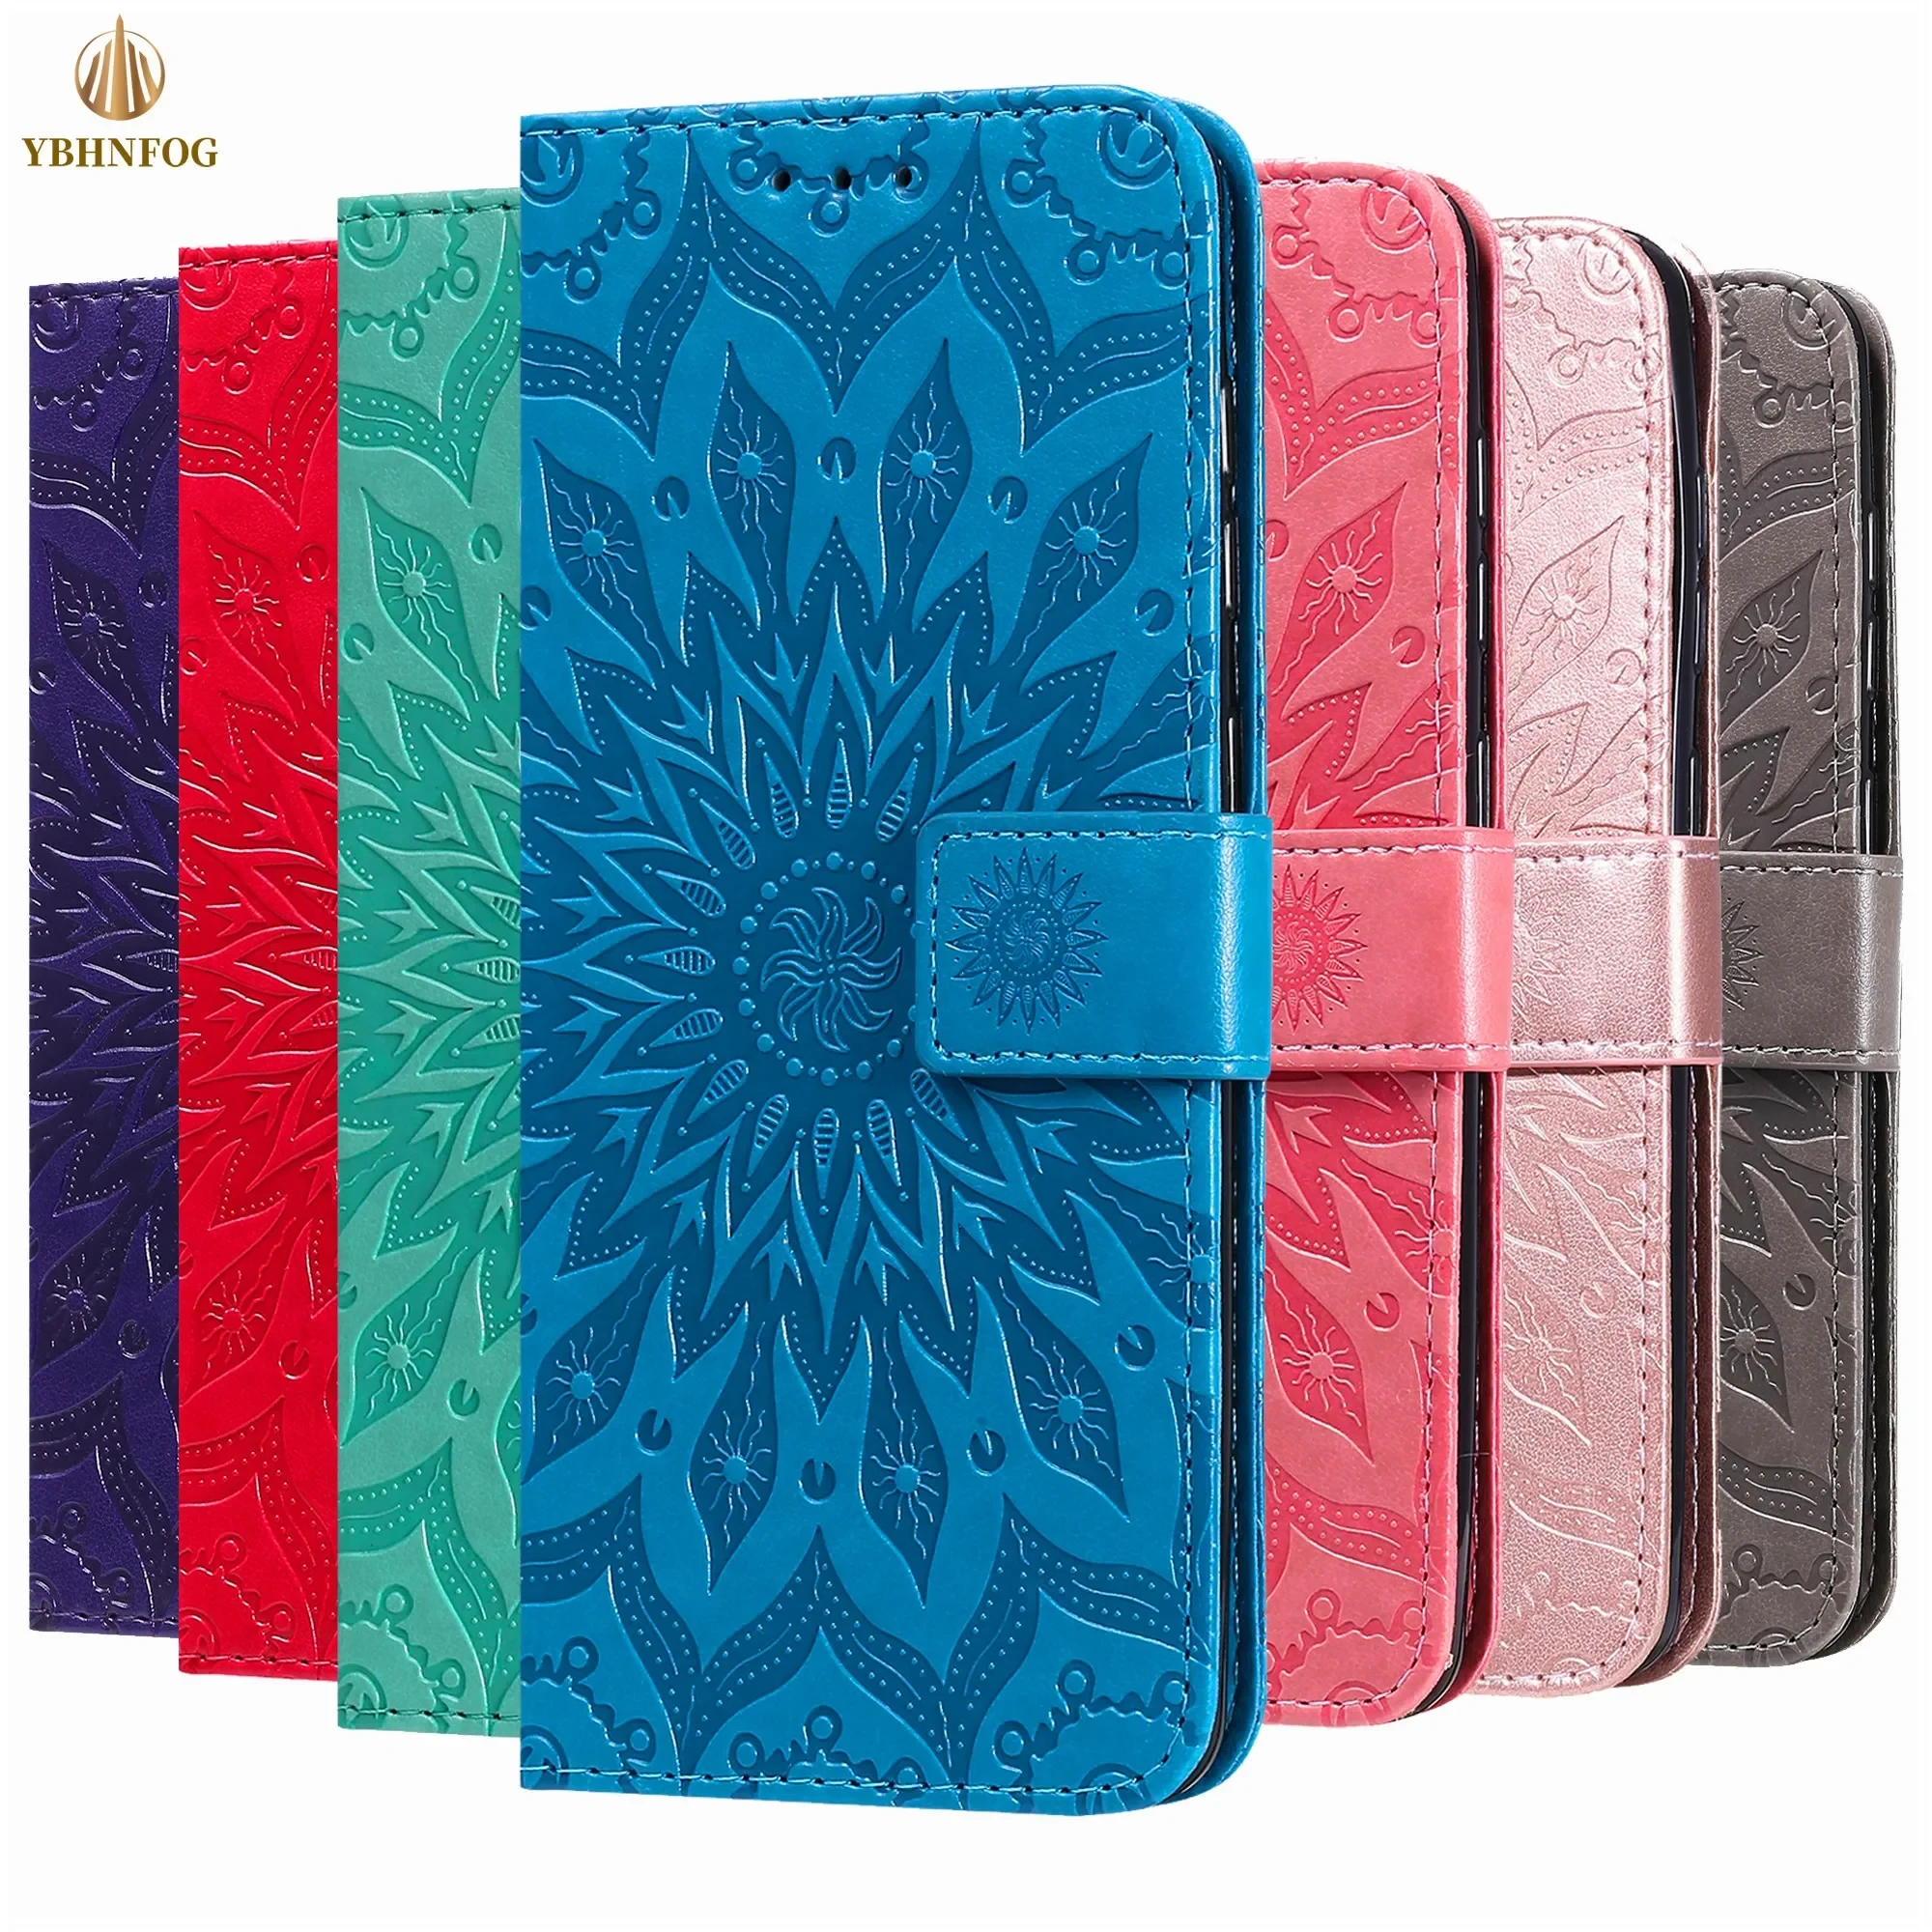 3D Embossed Leather Wallet Case For LG G4 G5 G6 G7 G8S ThinQ G9 Q6 Q8 Nexus 5X XPower 2 3 V20 V30 V40 Flip Holder Stand Cover